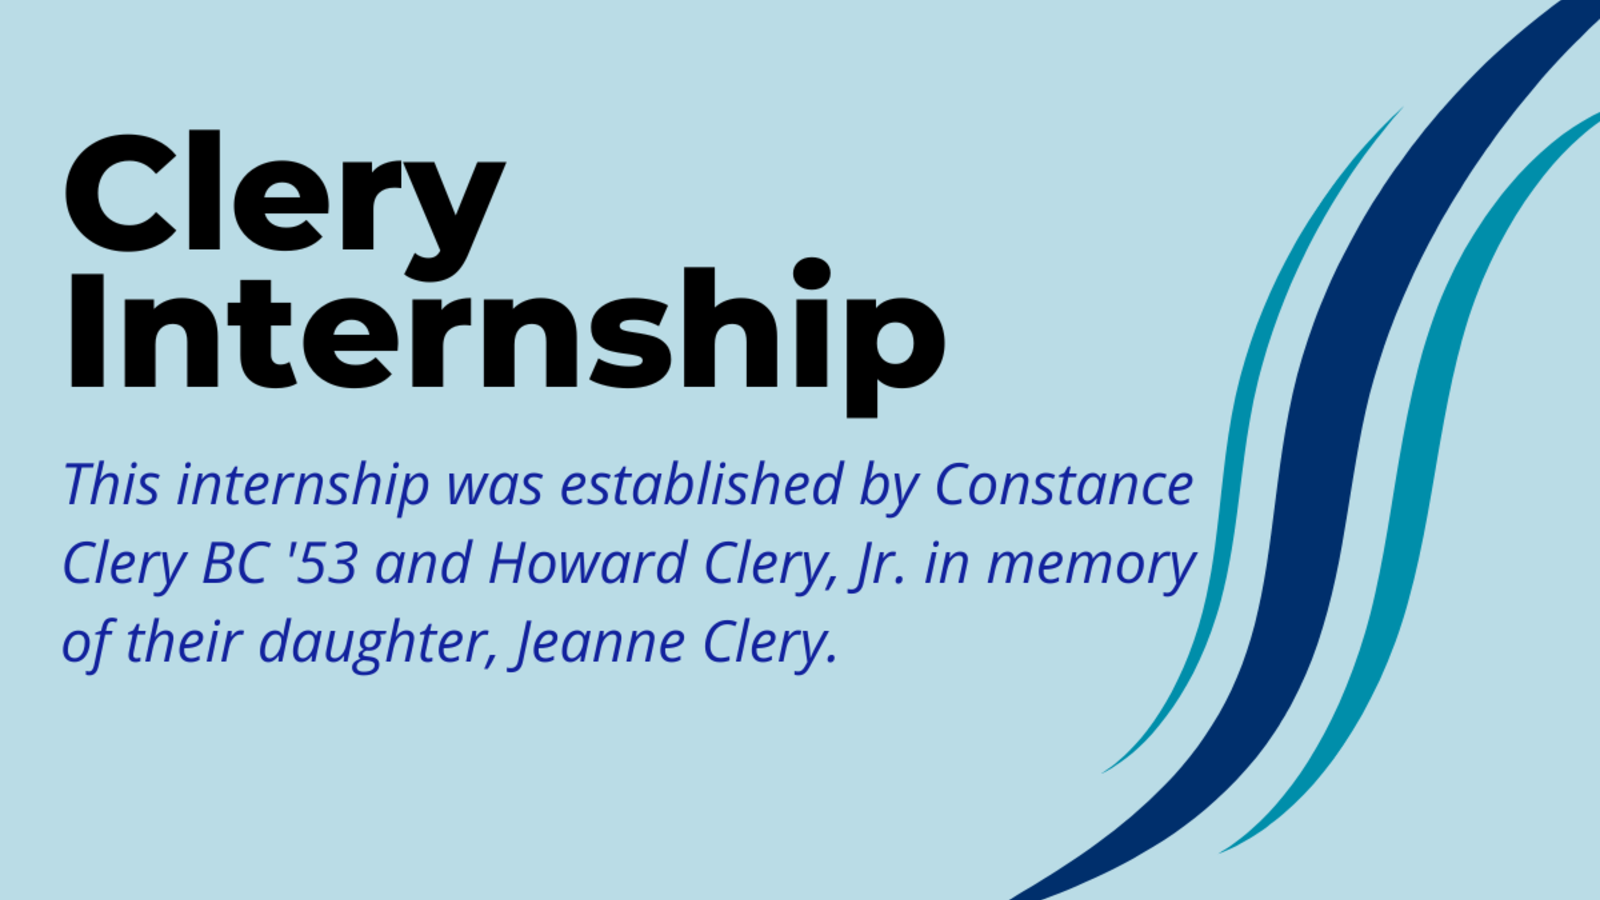 Light blue background with text that reads "Clery Internship" and "This internship was established by Constance Clery BC '53 and Howard Clery, Jr. in memory of their daughter, Jeanne Clery."